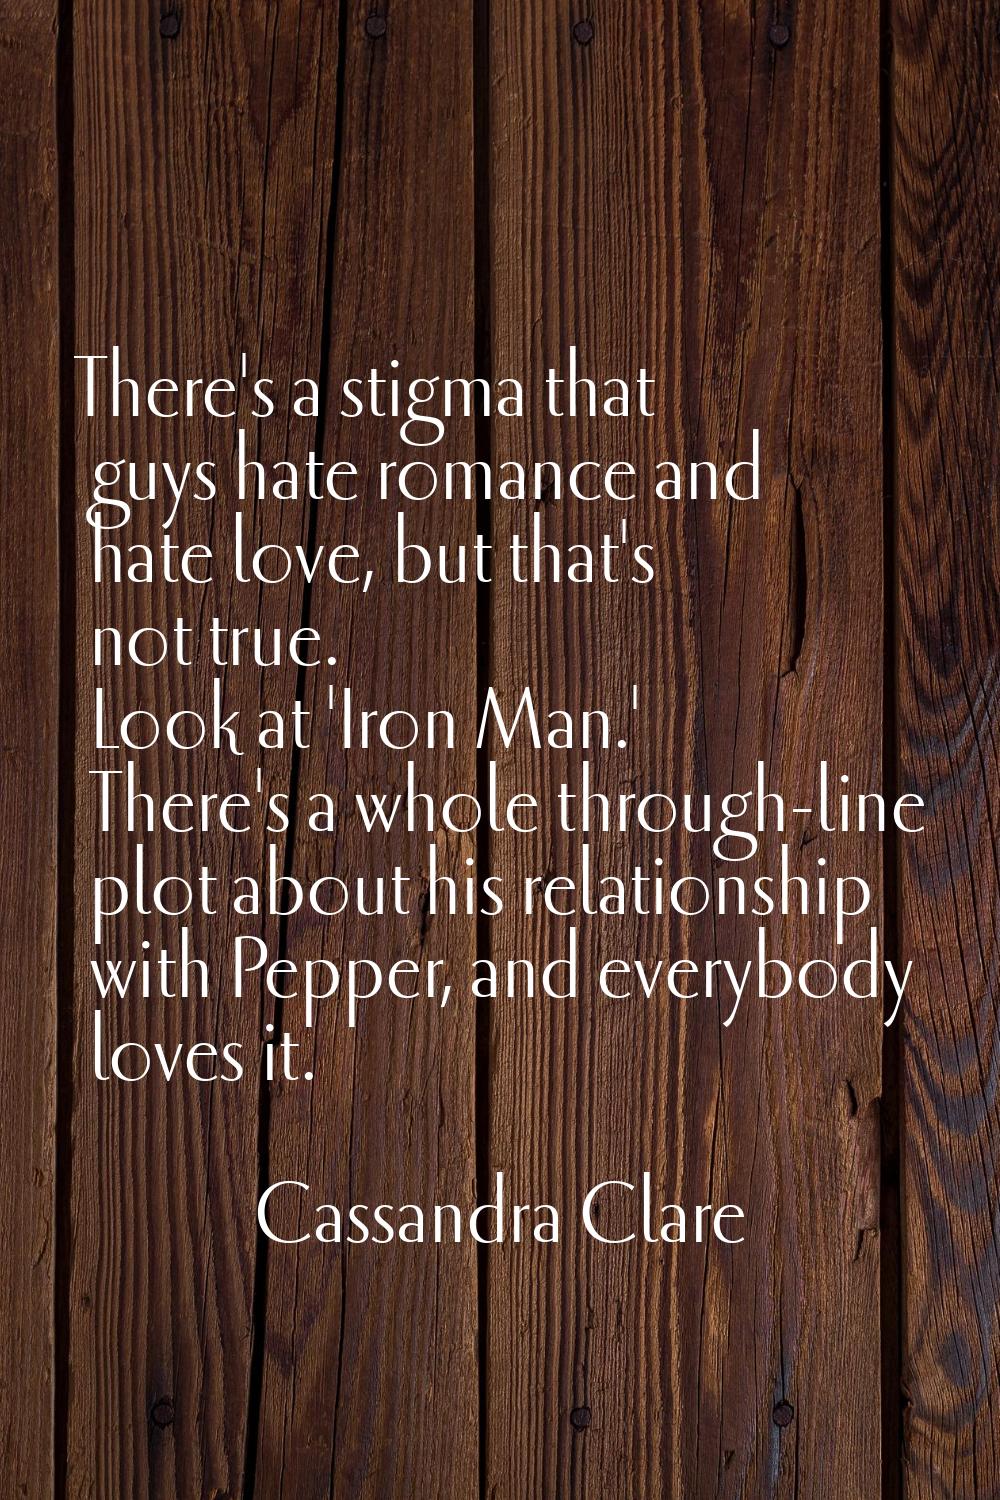 There's a stigma that guys hate romance and hate love, but that's not true. Look at 'Iron Man.' The